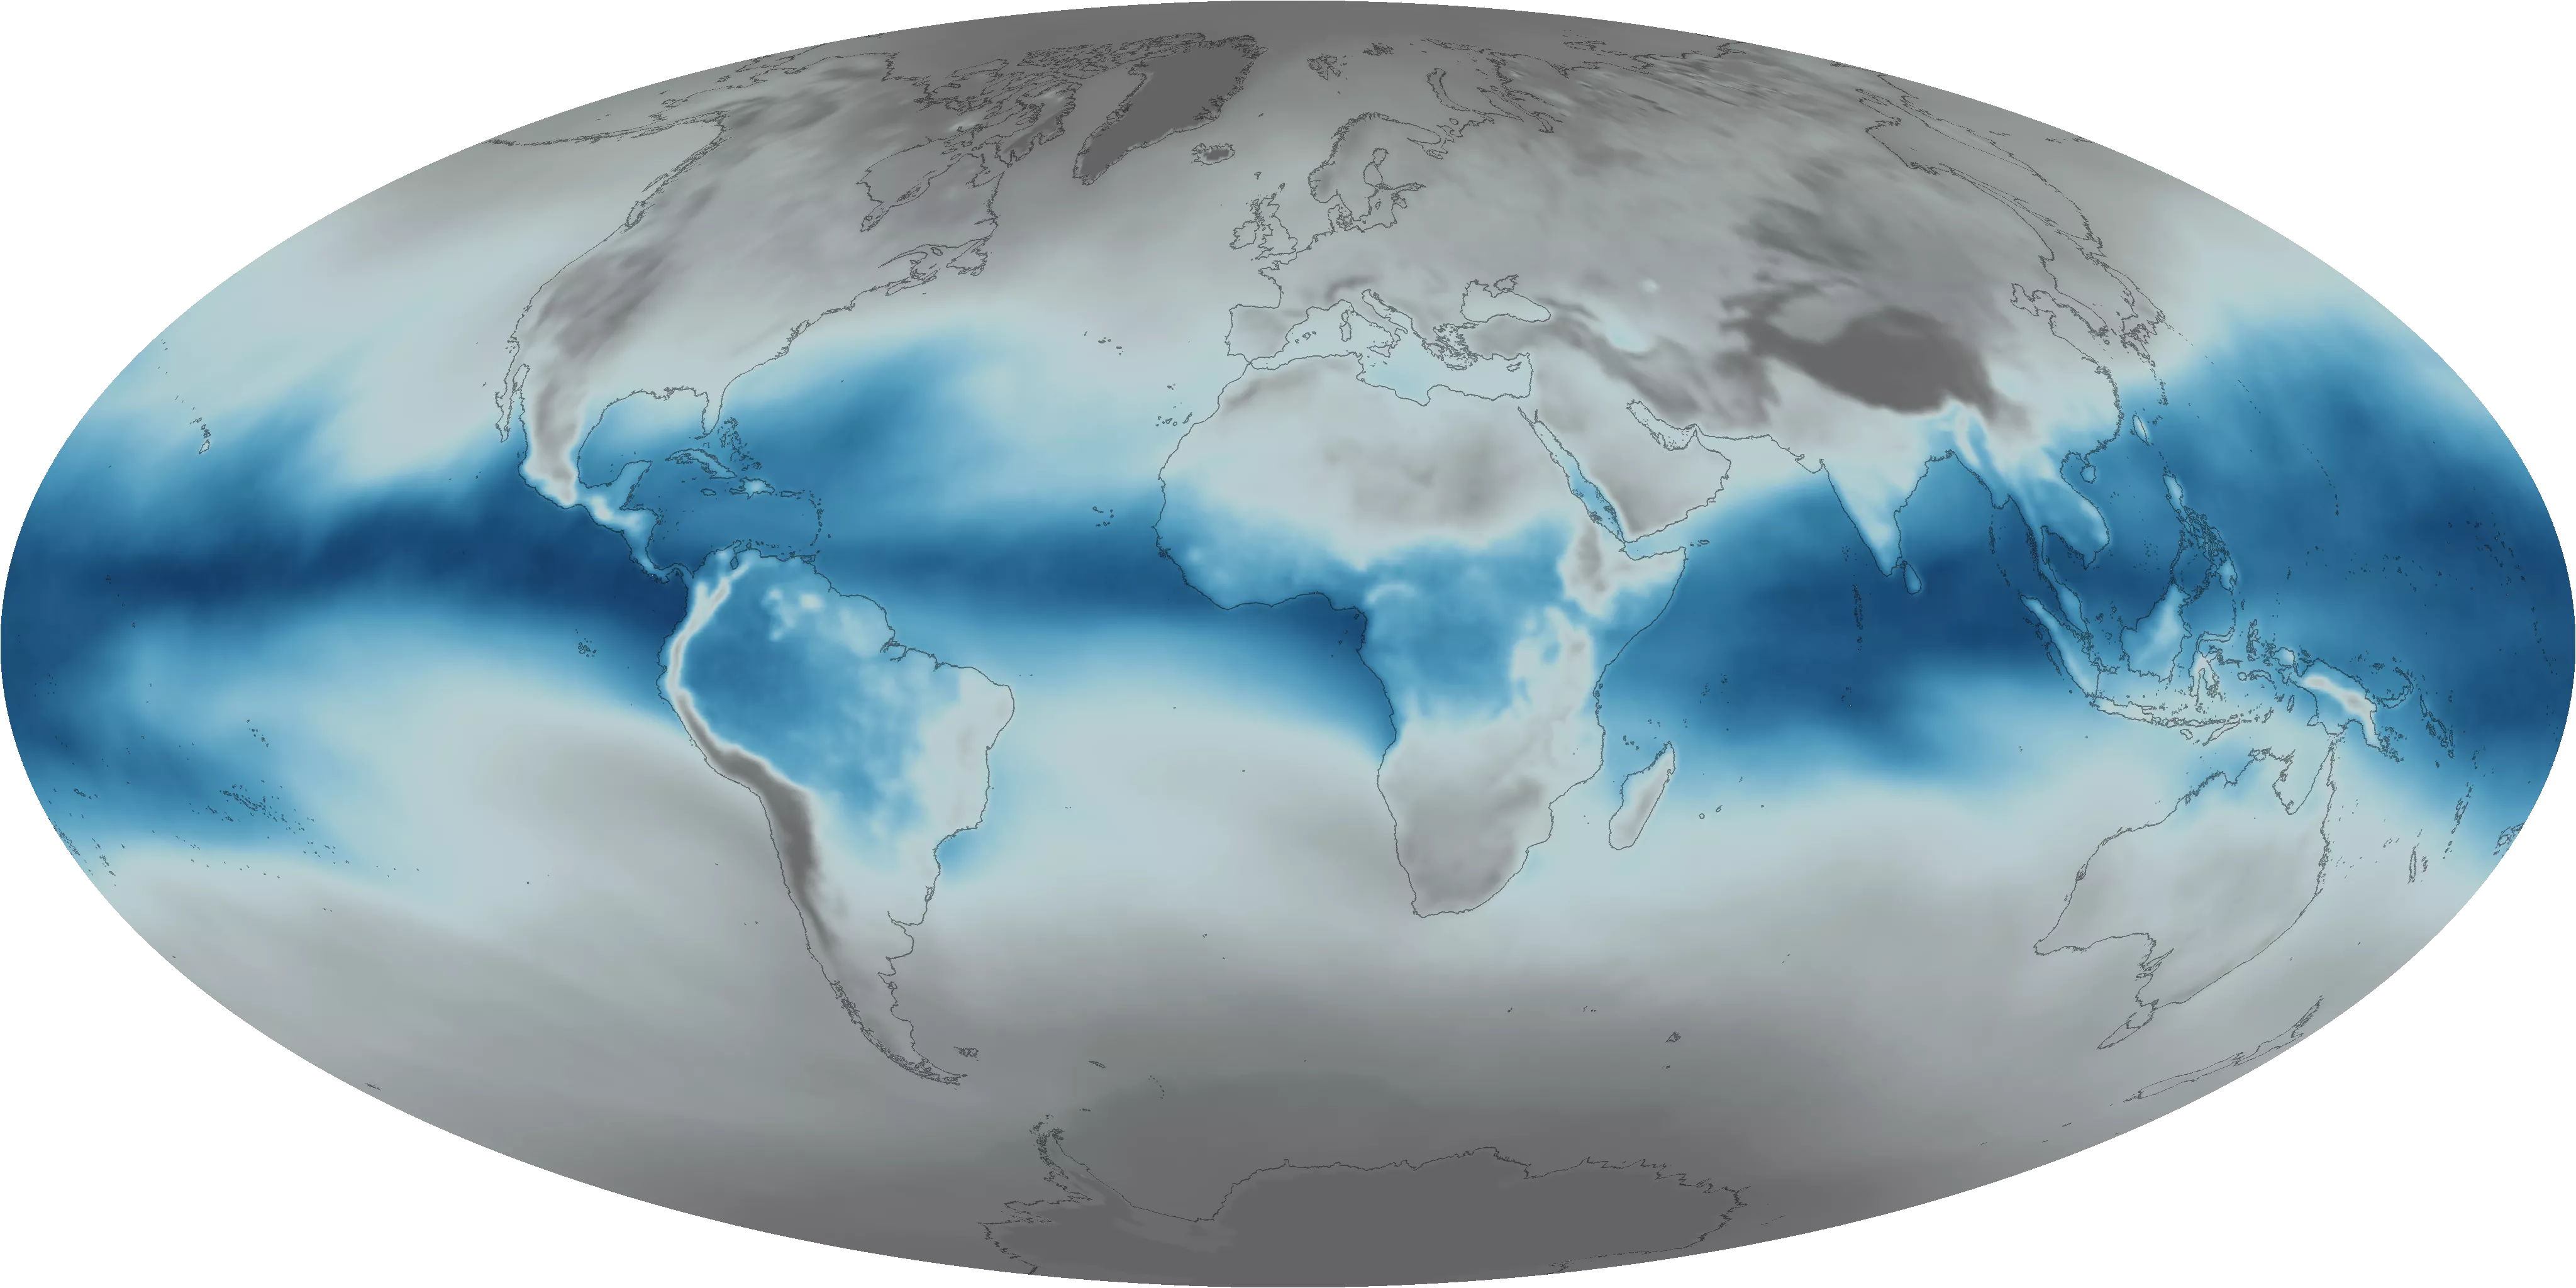 Image of the earth and moisture